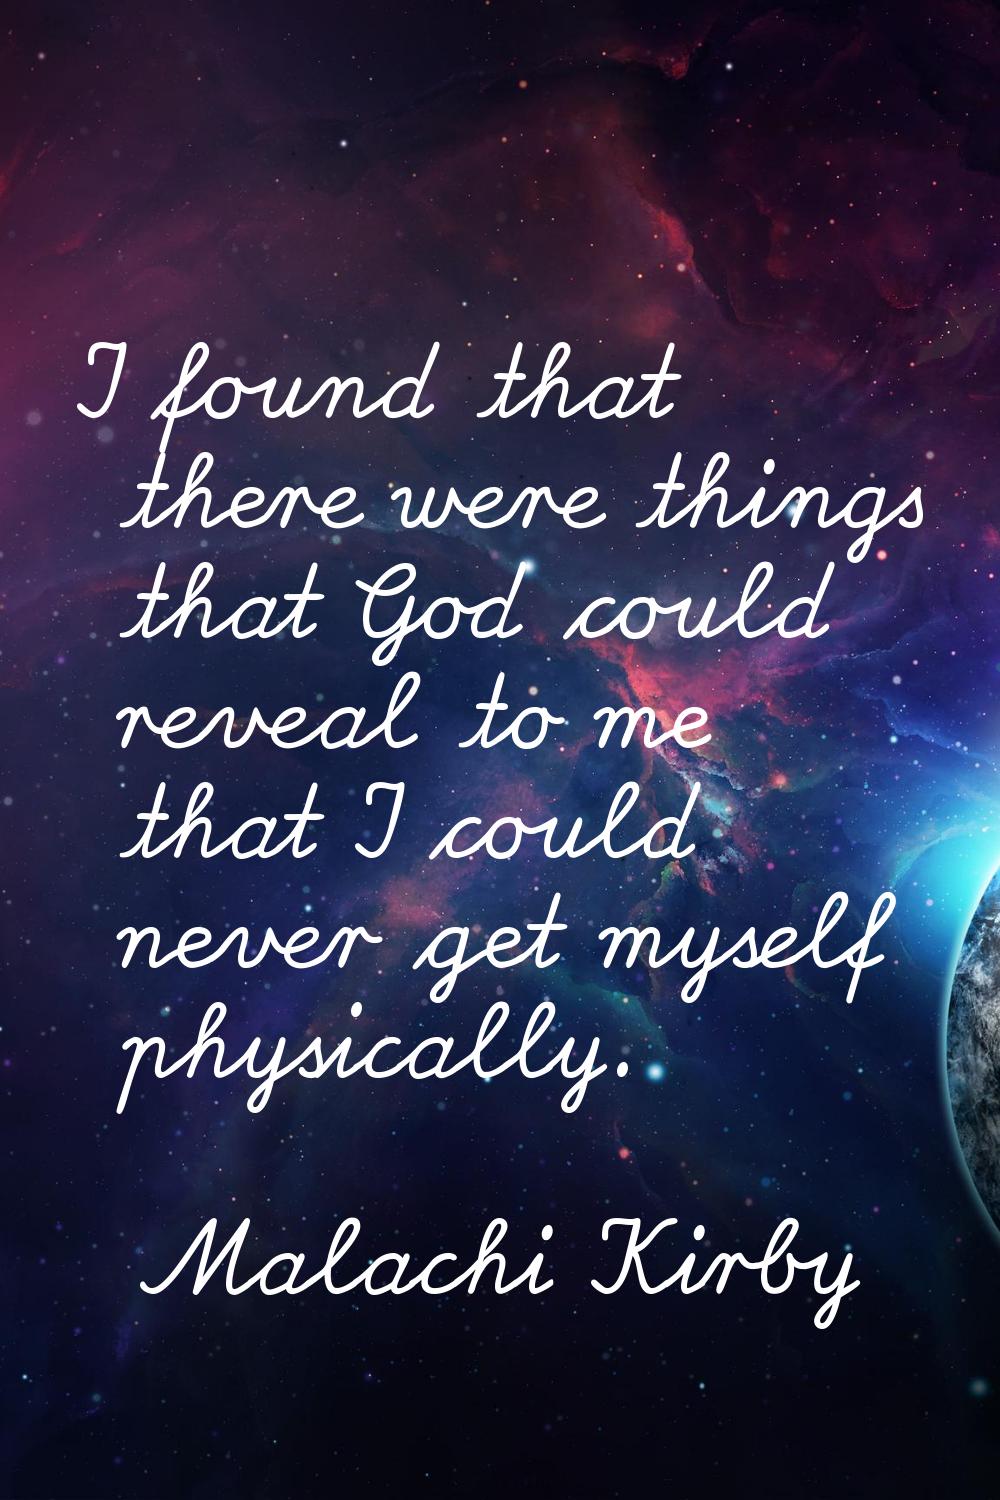 I found that there were things that God could reveal to me that I could never get myself physically